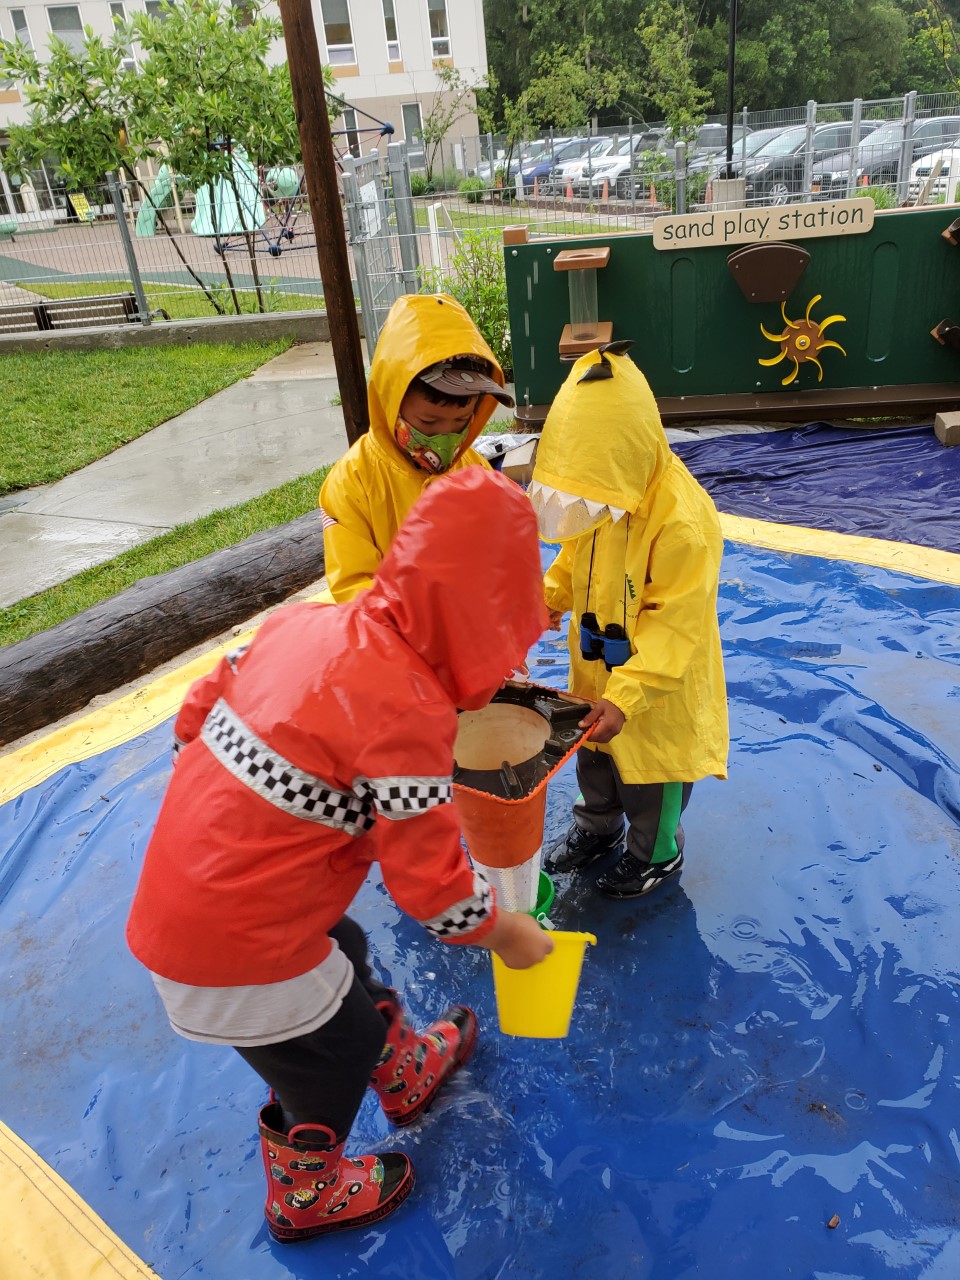 Three children in raincoats and boots play with buckets, water, and an upside down traffic cone